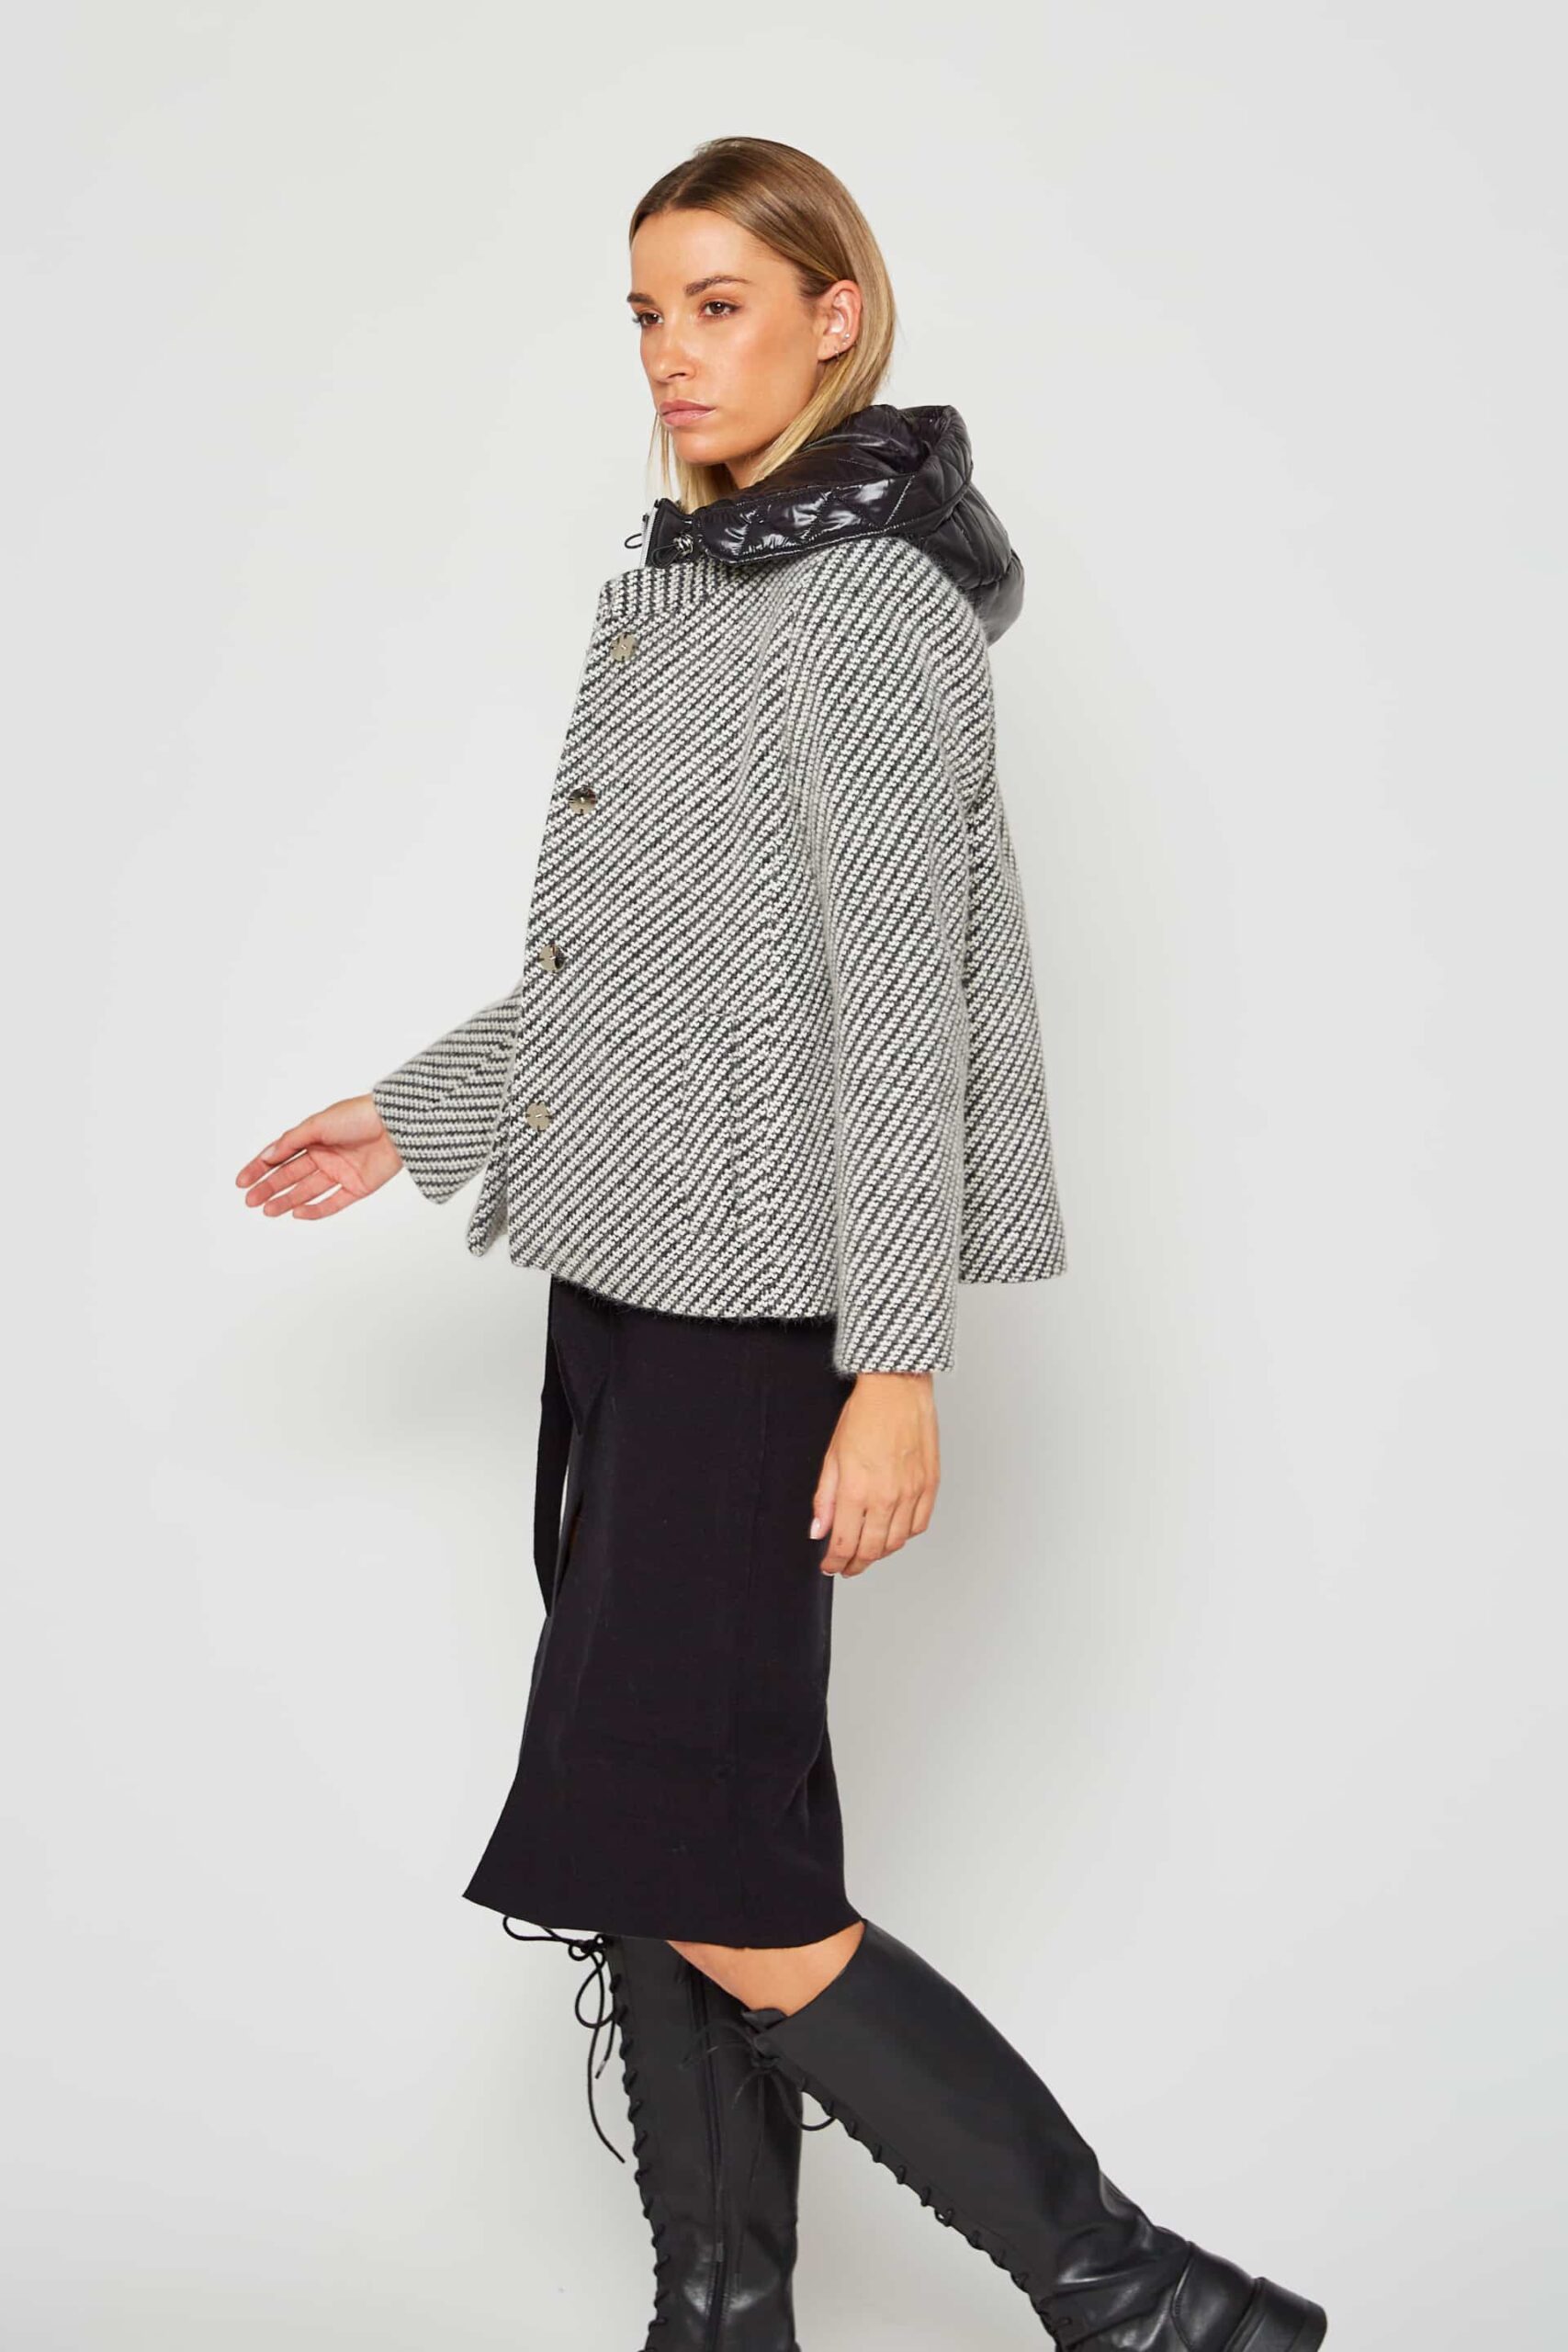 Wool coat combined with padding